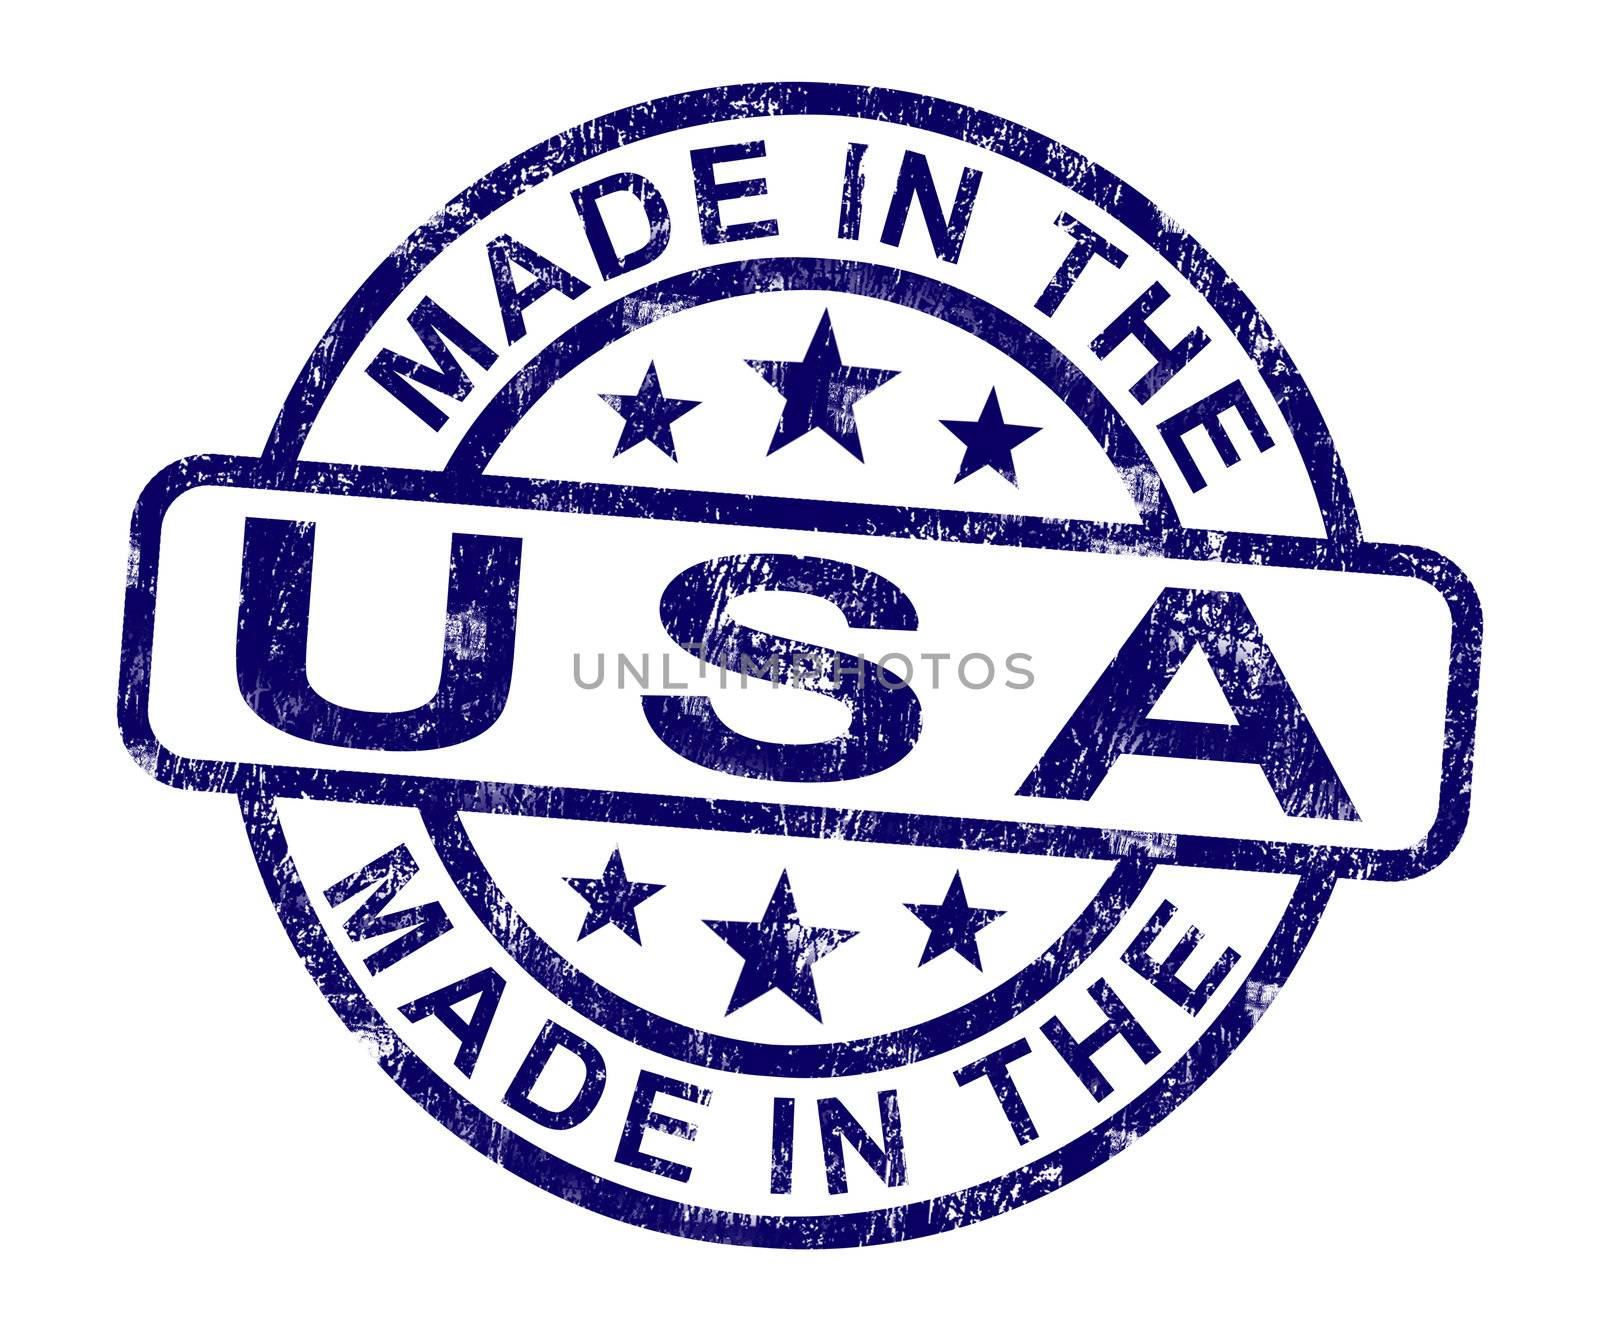 Made In USA Stamp Showing American Product Or Produce